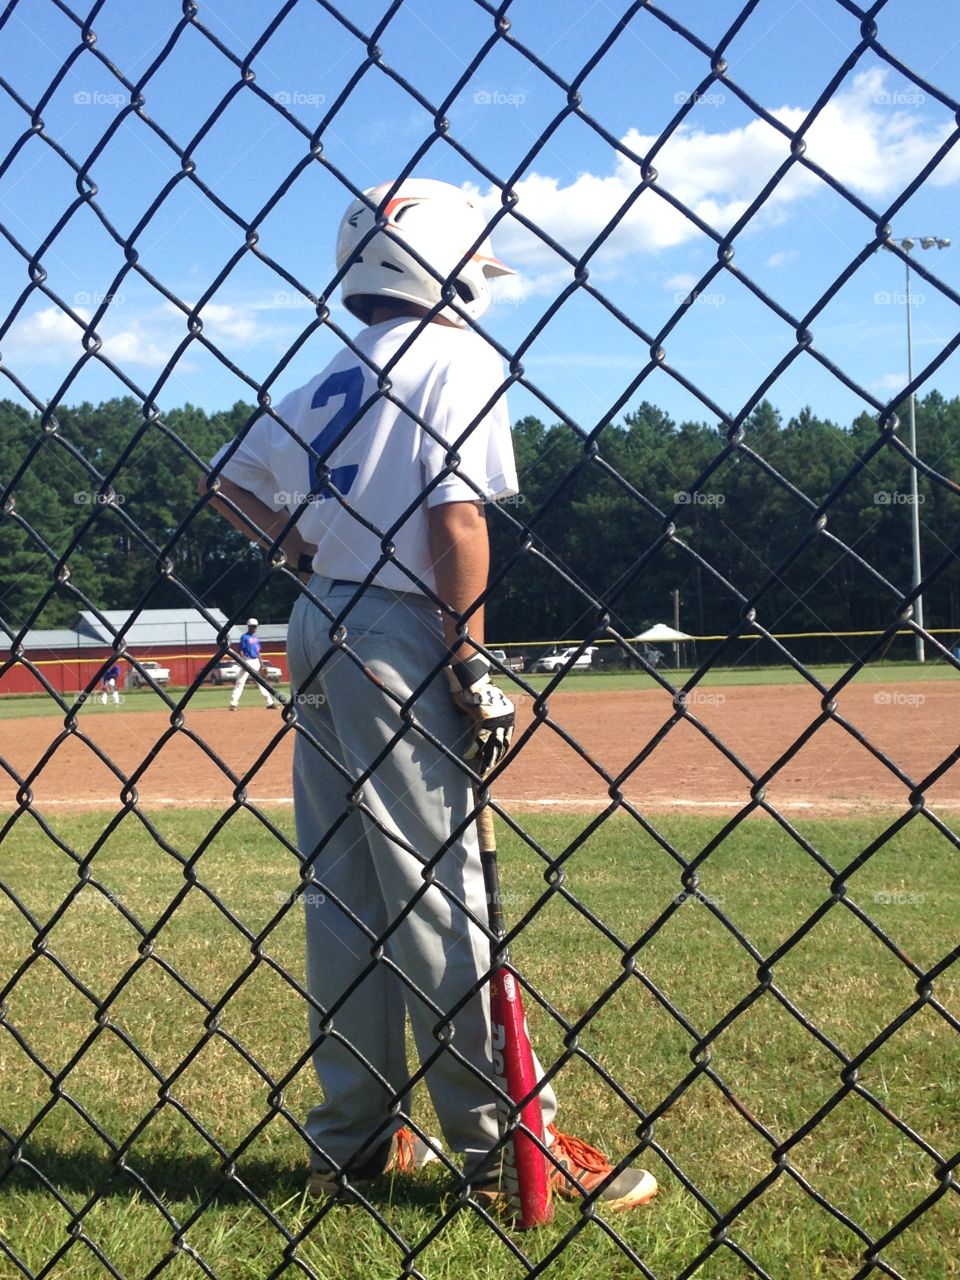 Rear view of baseball player